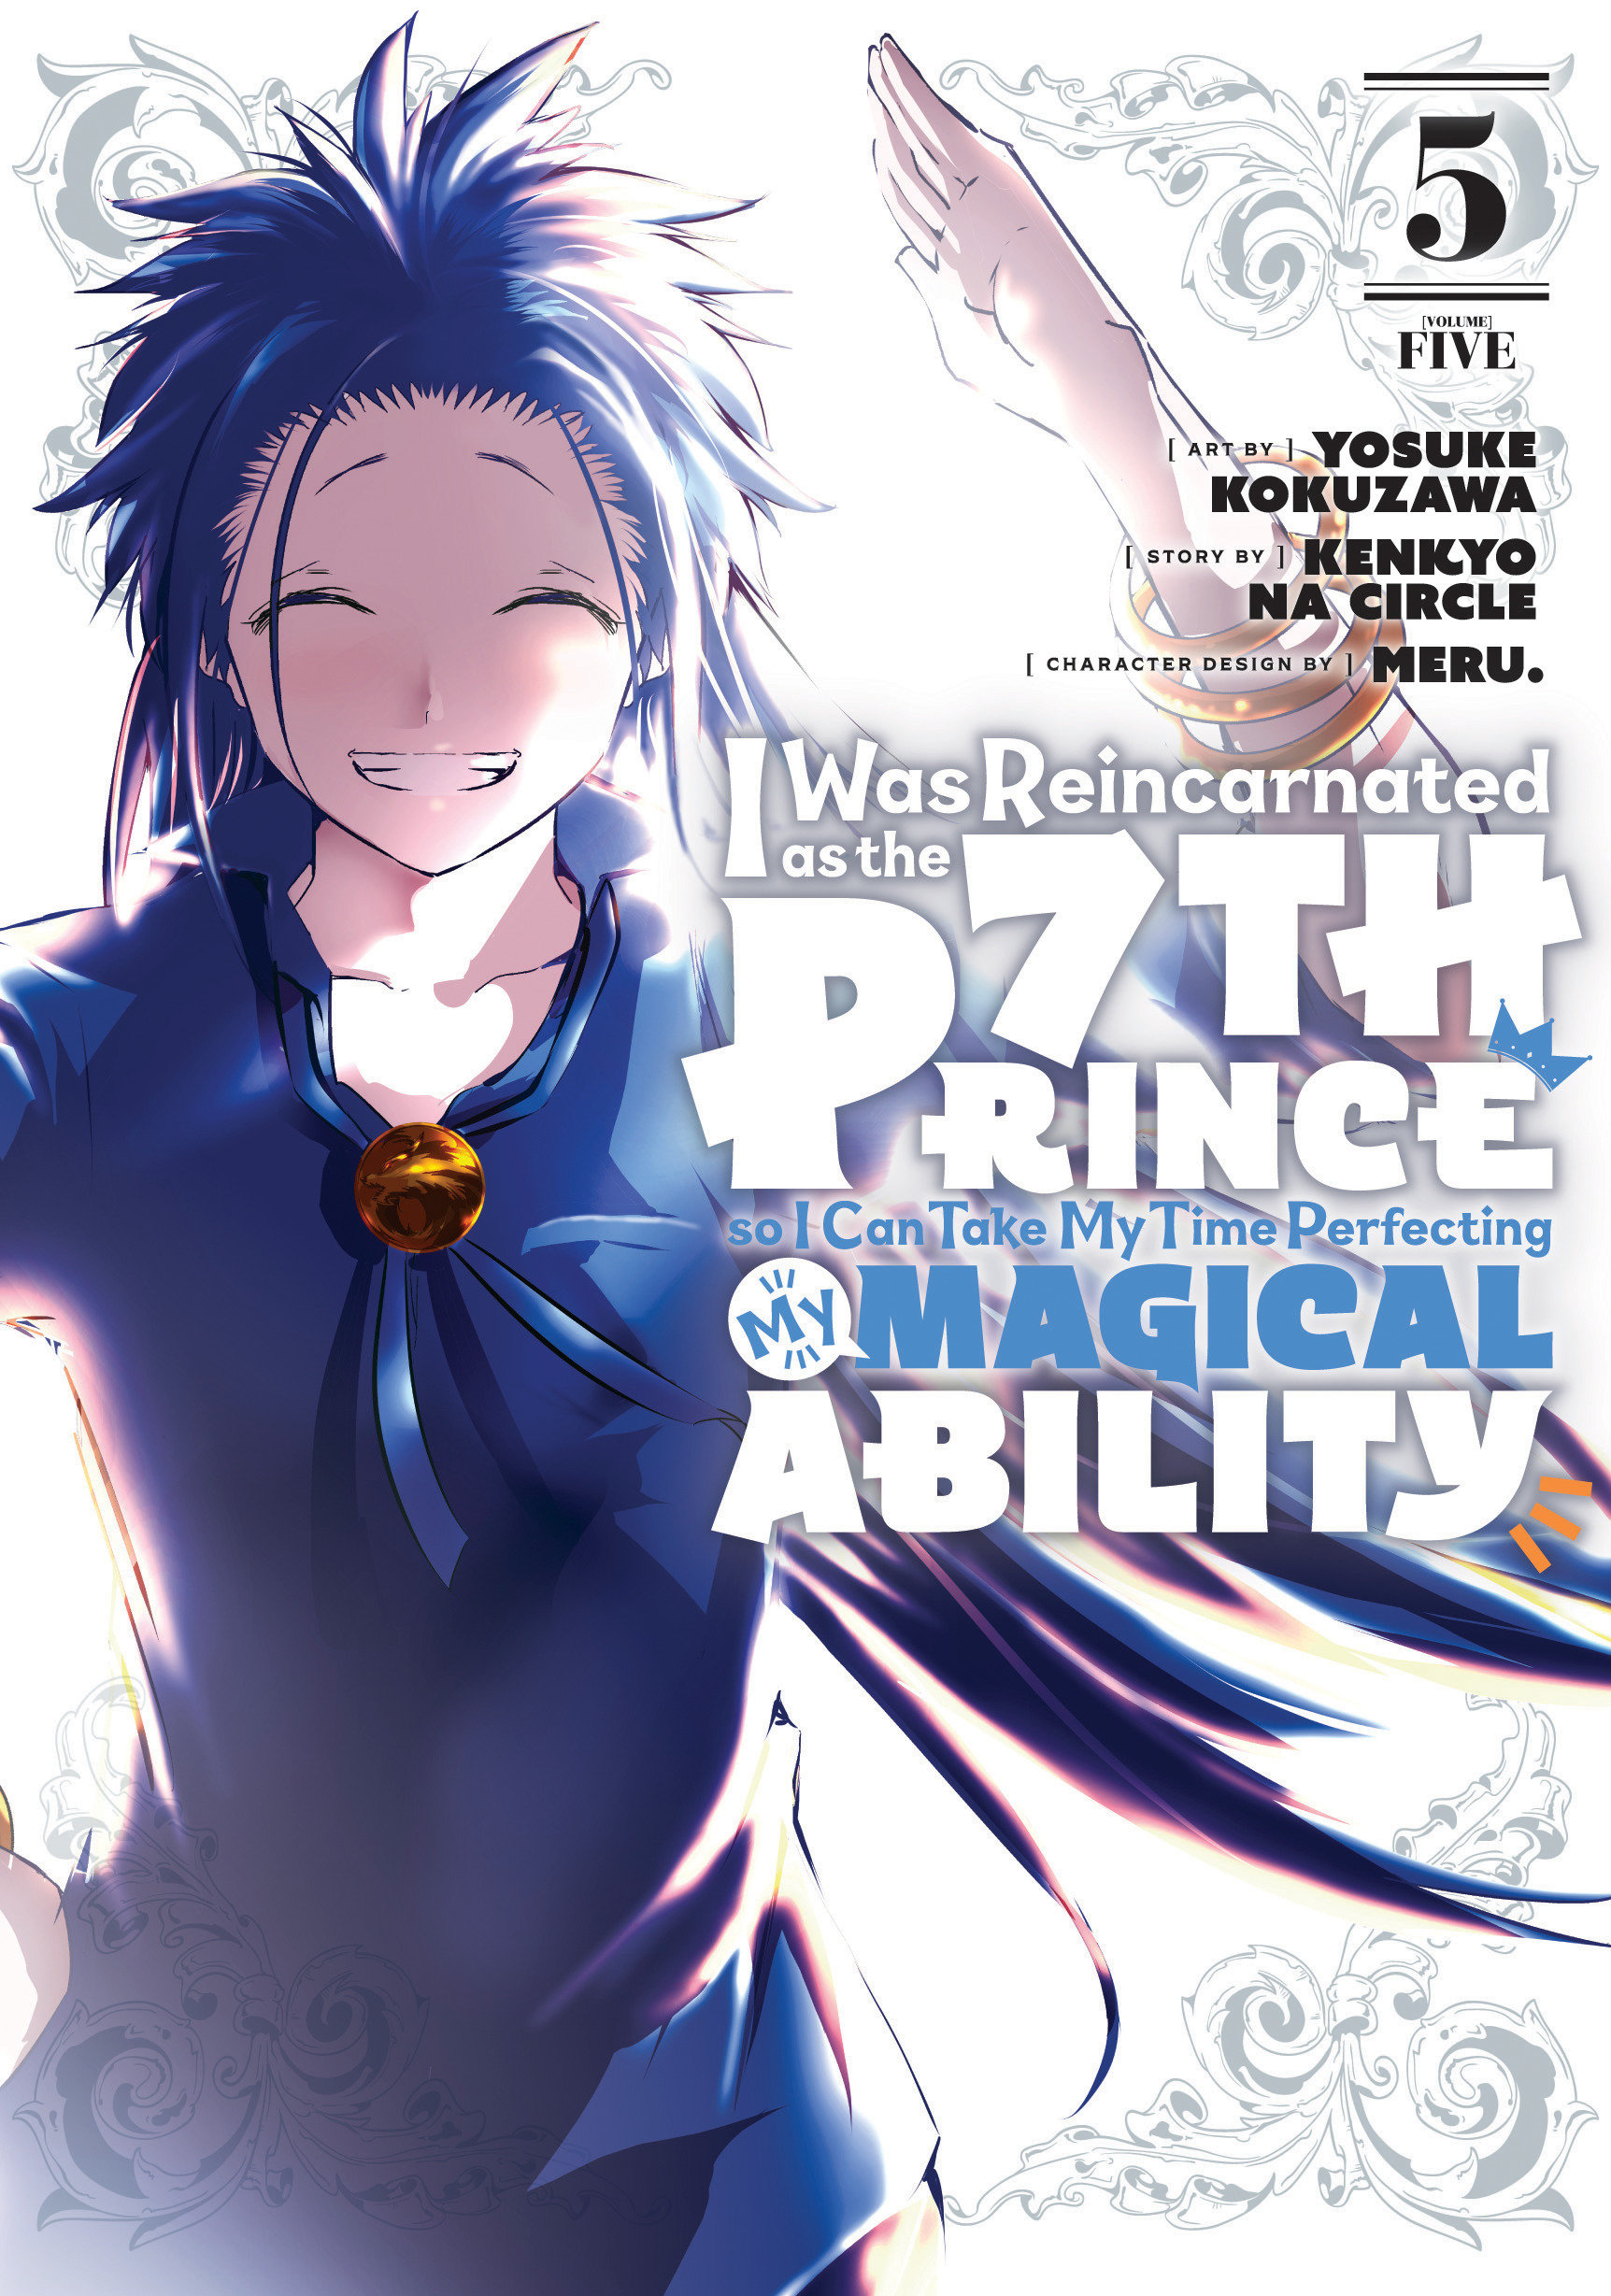 I Was Reincarnated as the 7th Prince So I Can Take My Time Perfecting My Magical Ability Manga Volume 5